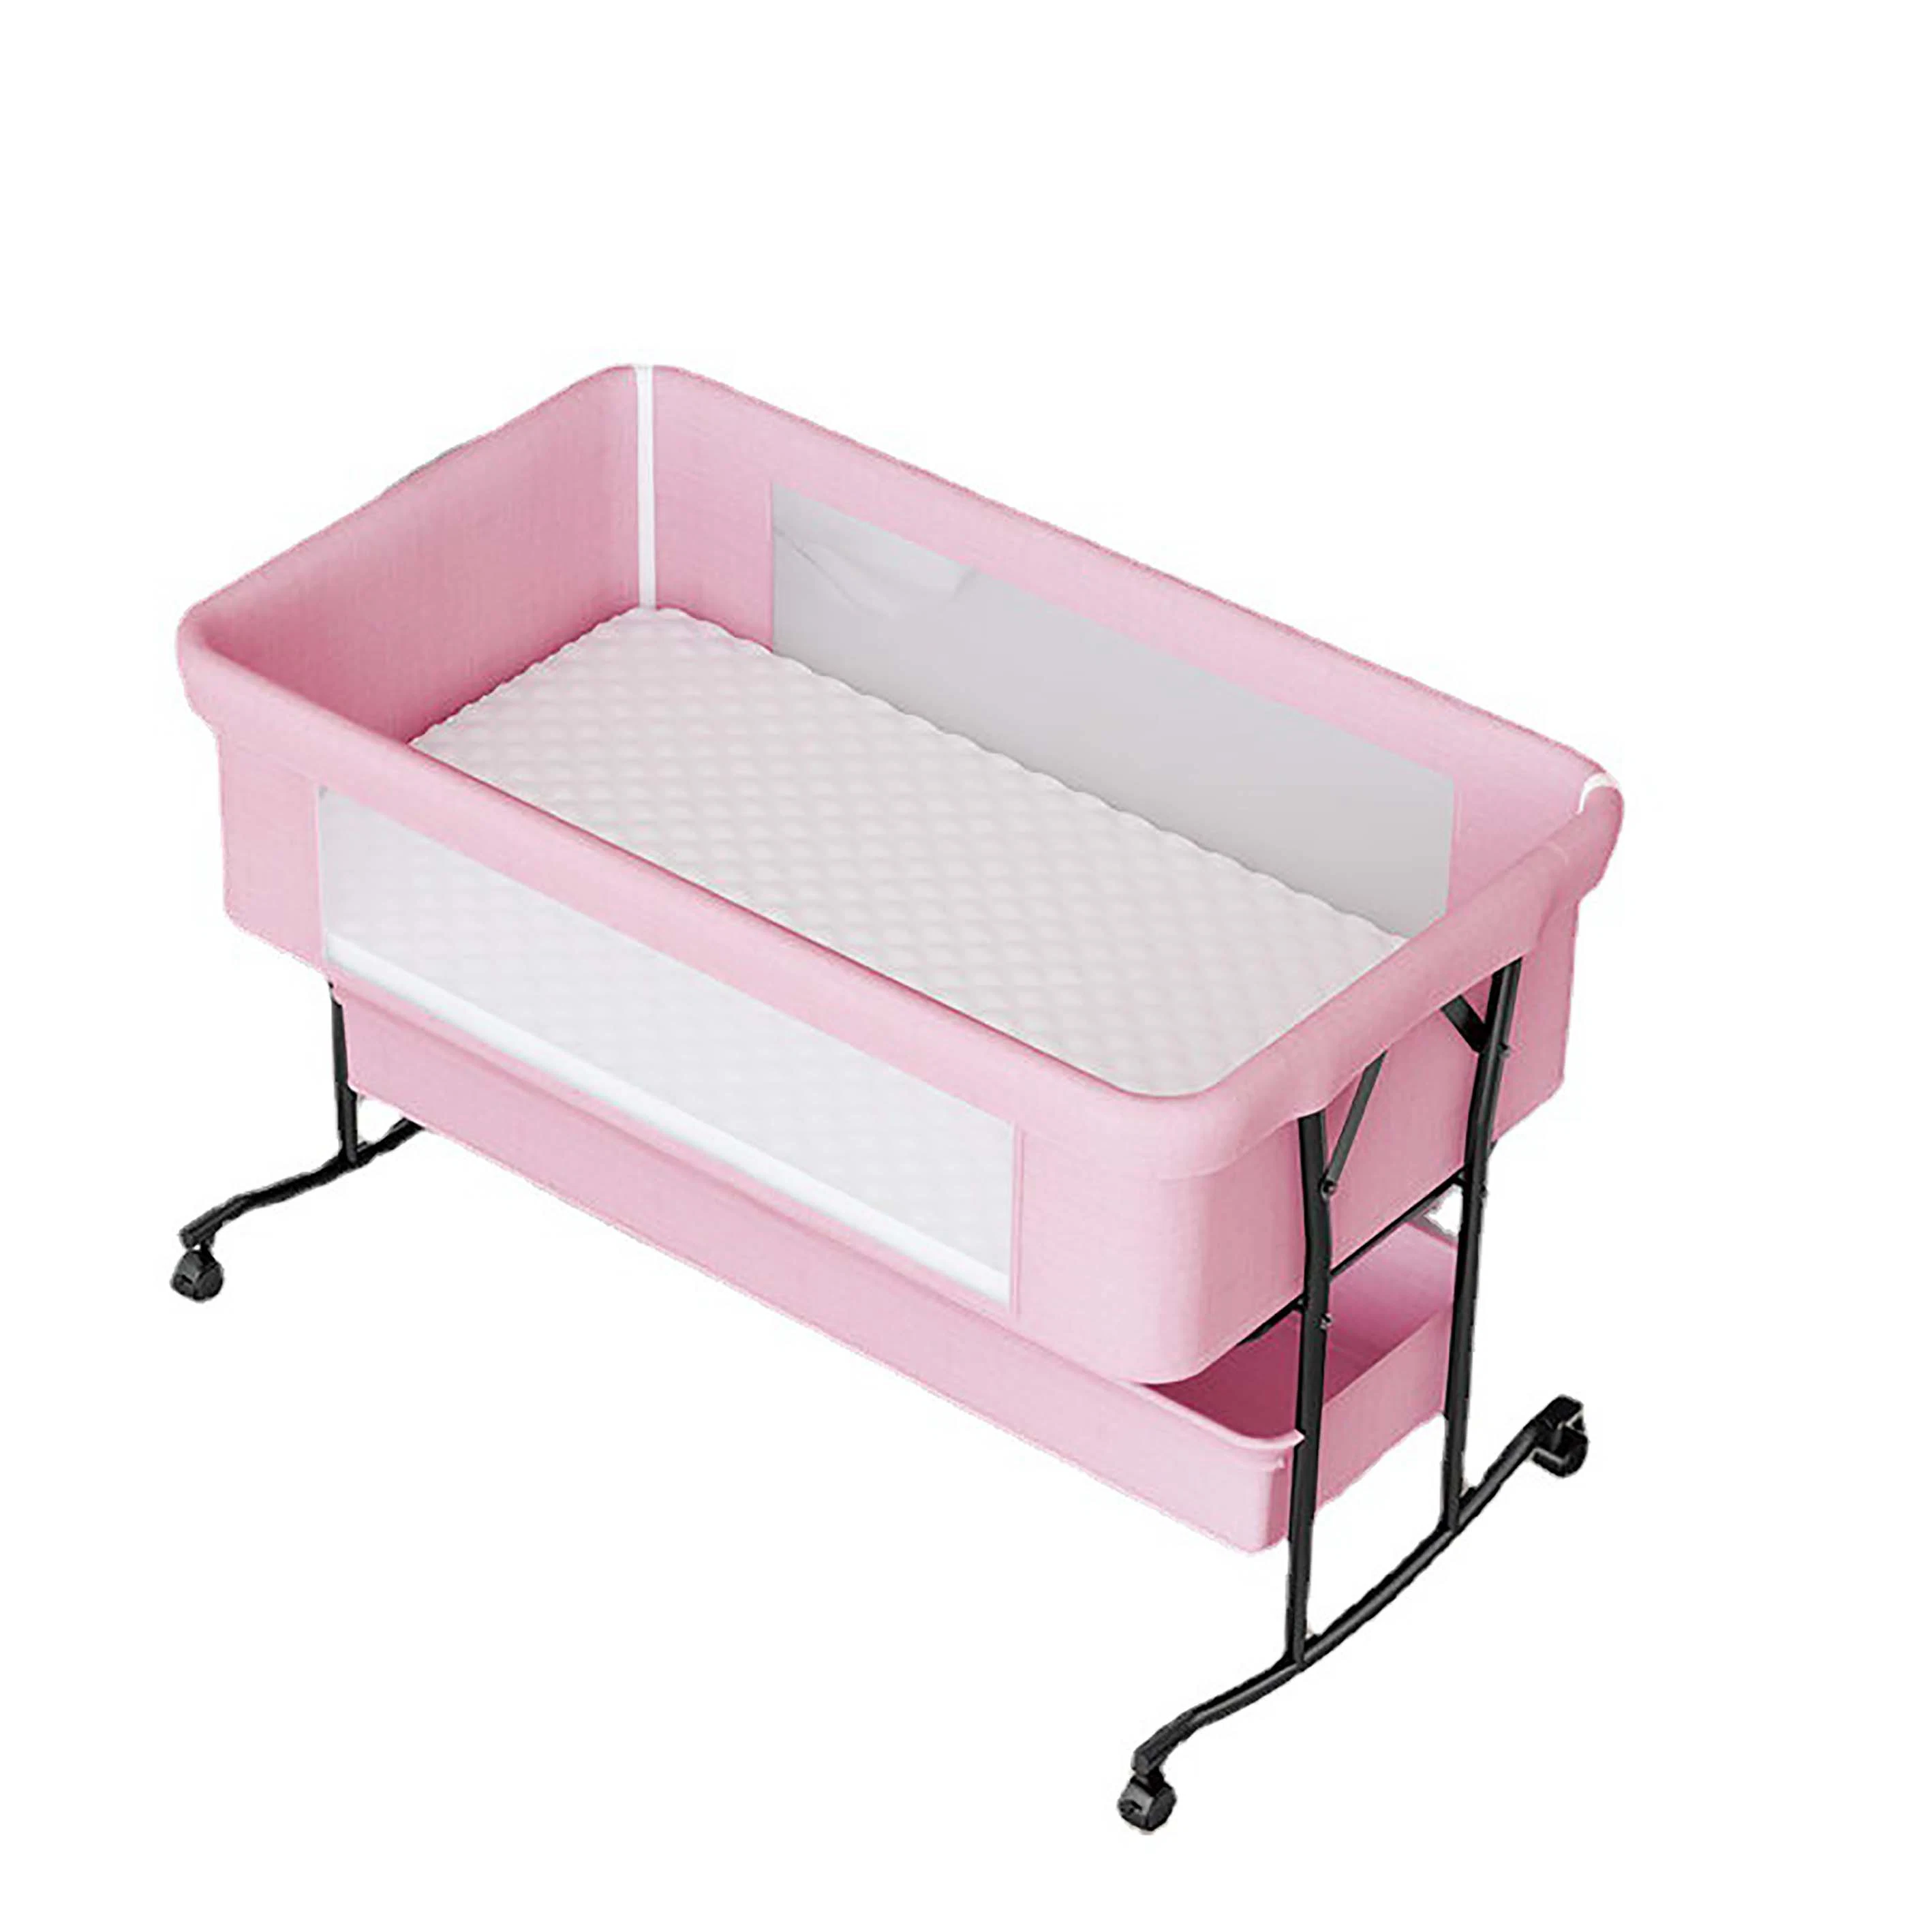 Baby Cradle Portable Crib with Wheels Bassinet Bedside Sleeper Bed